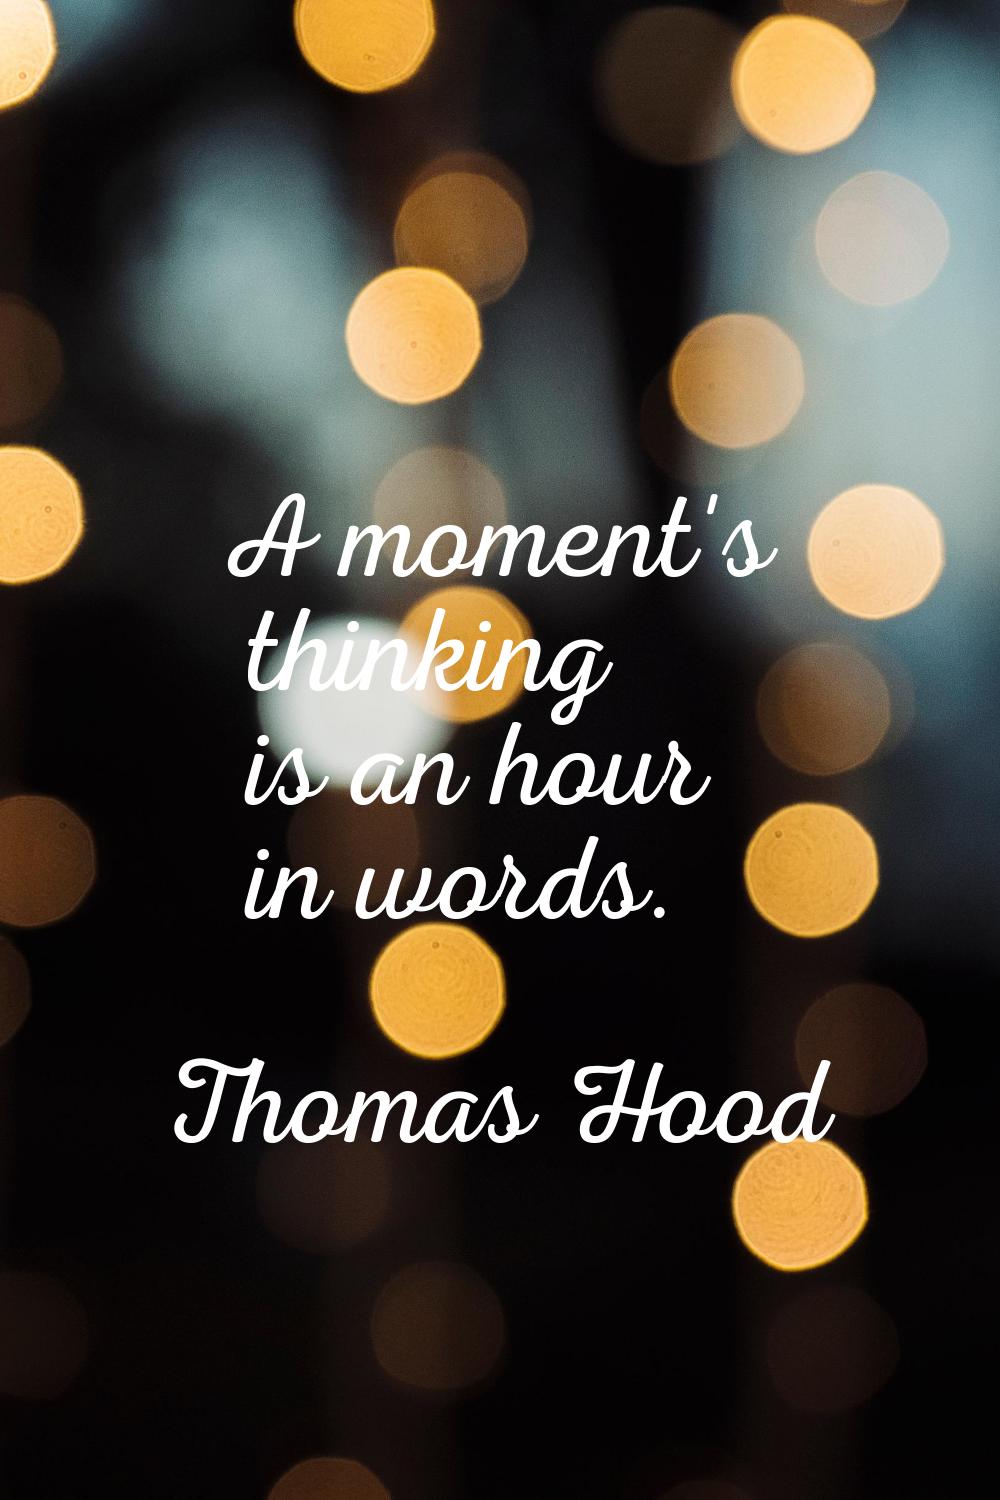 A moment's thinking is an hour in words.